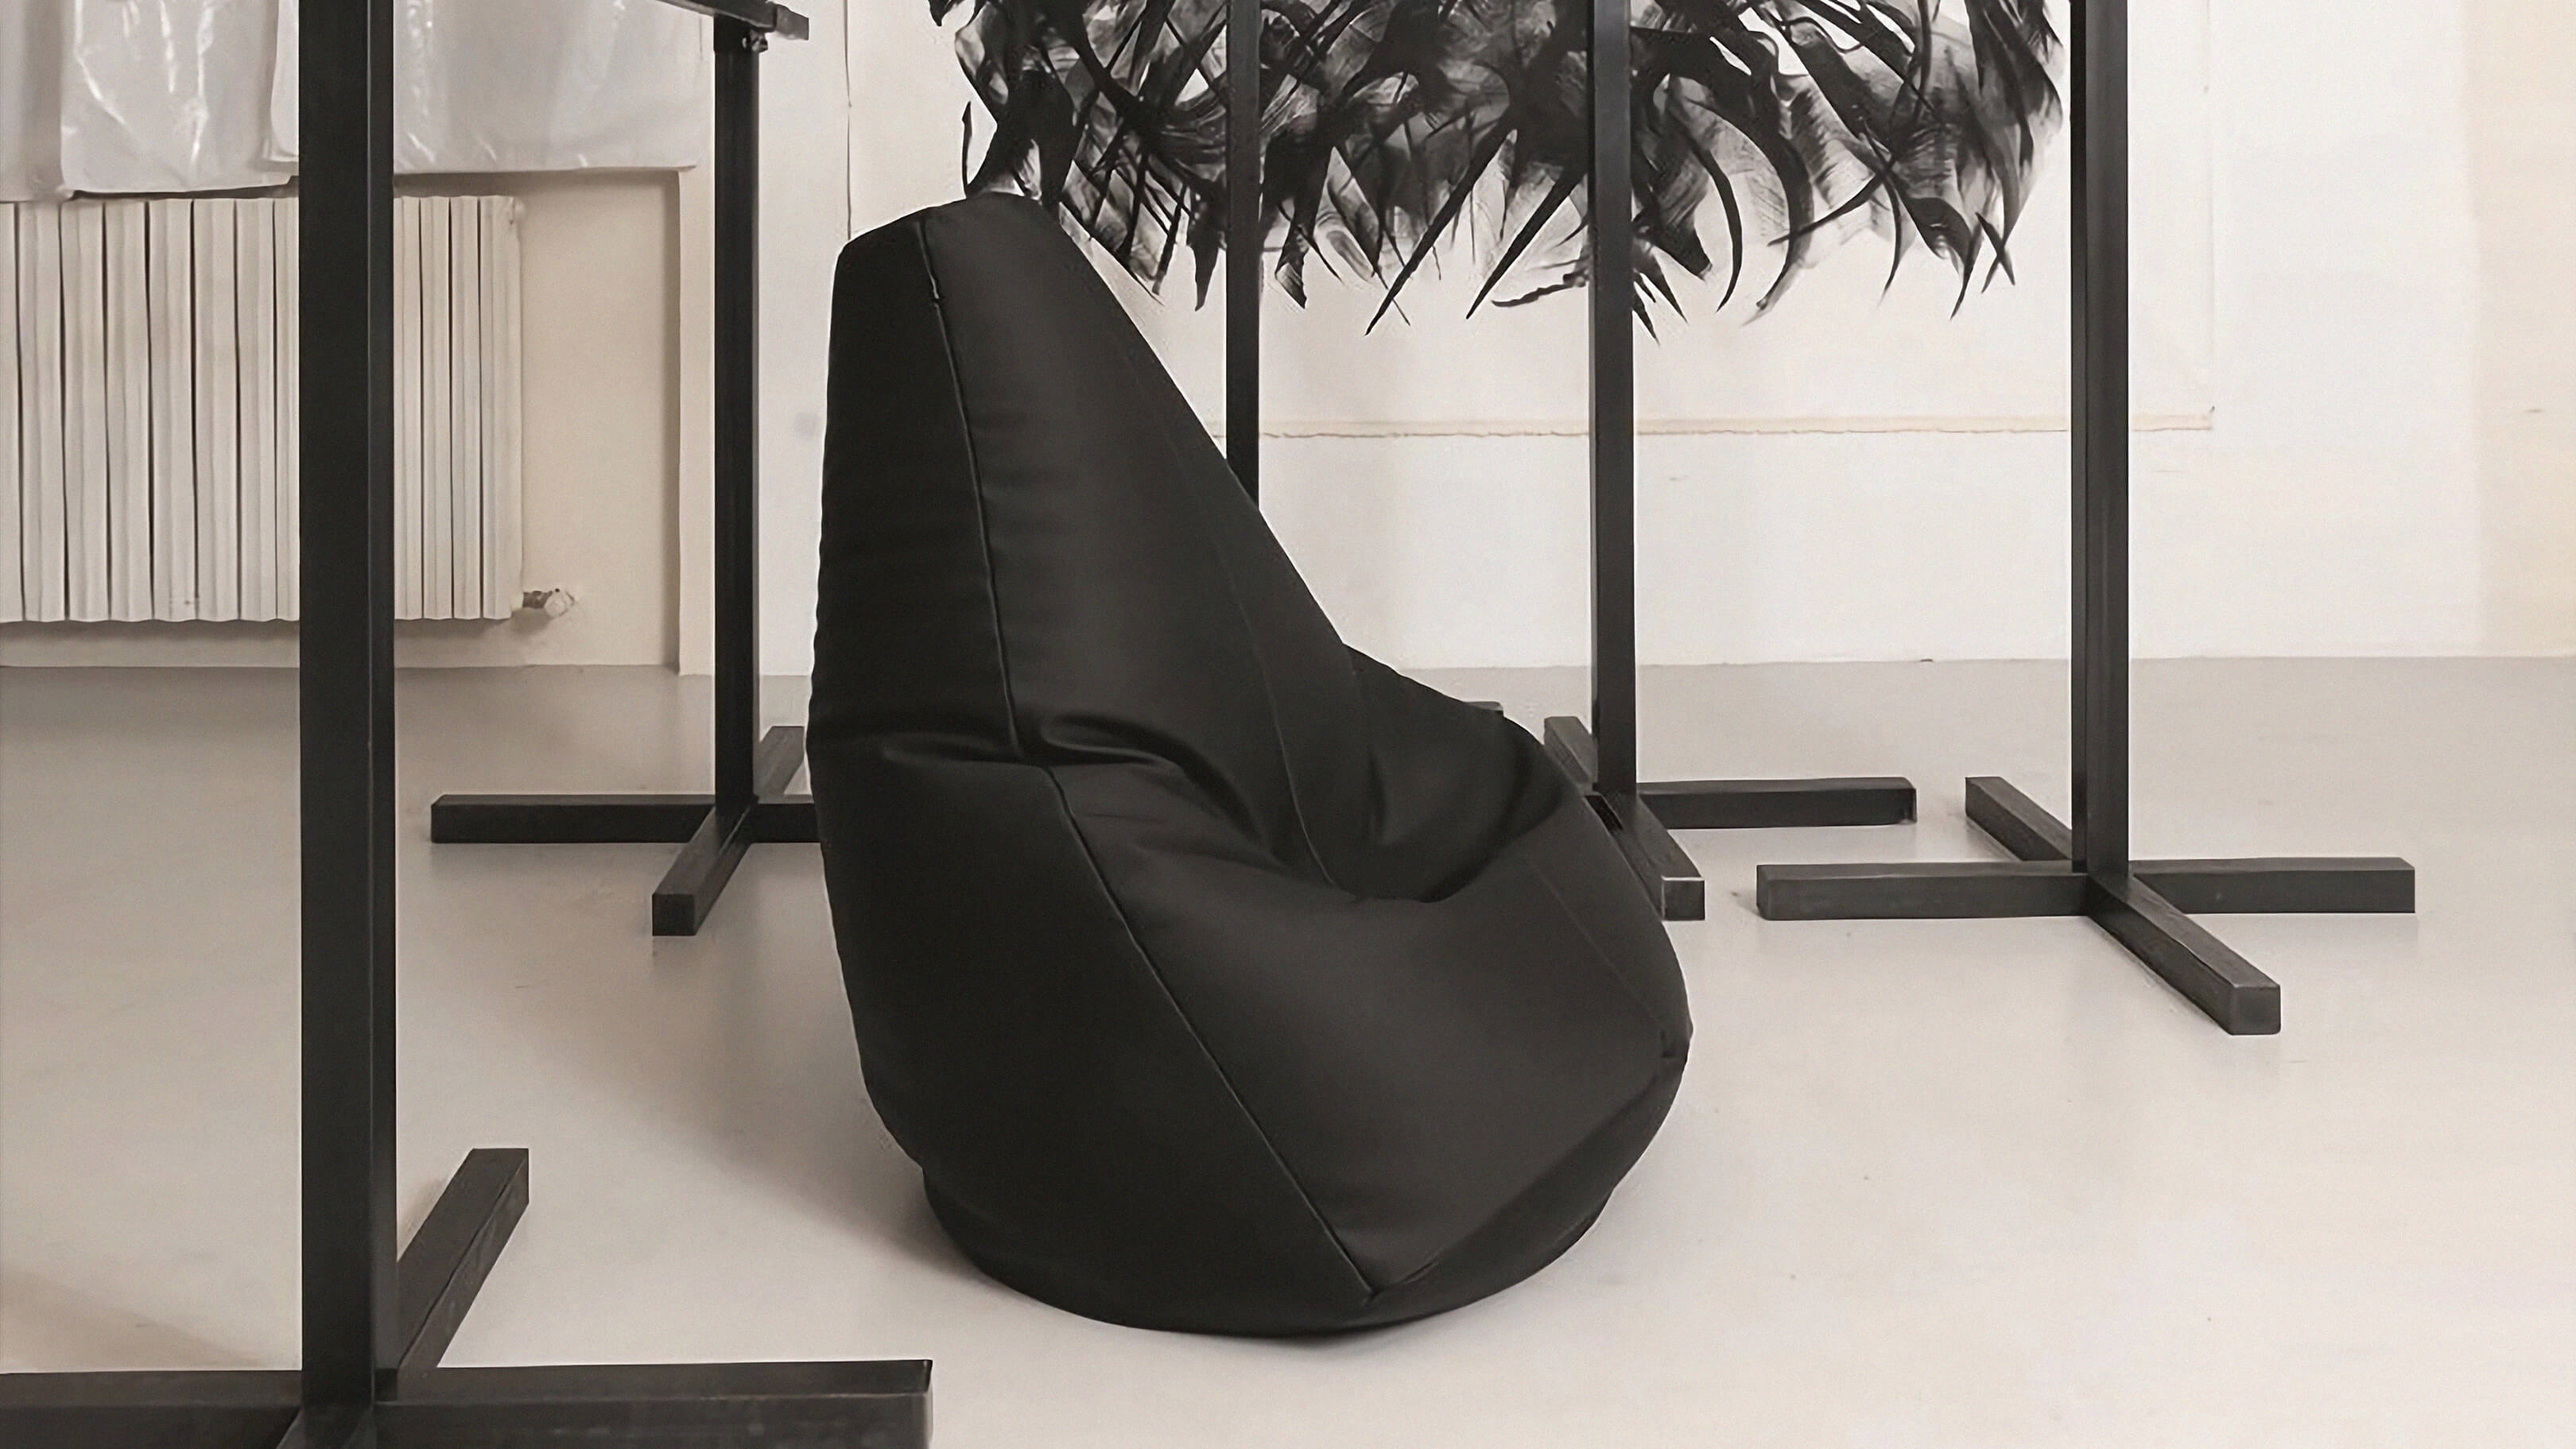 Zanotta Sacco Chair - How A Luxury Bean Bag Became a Popular Icon